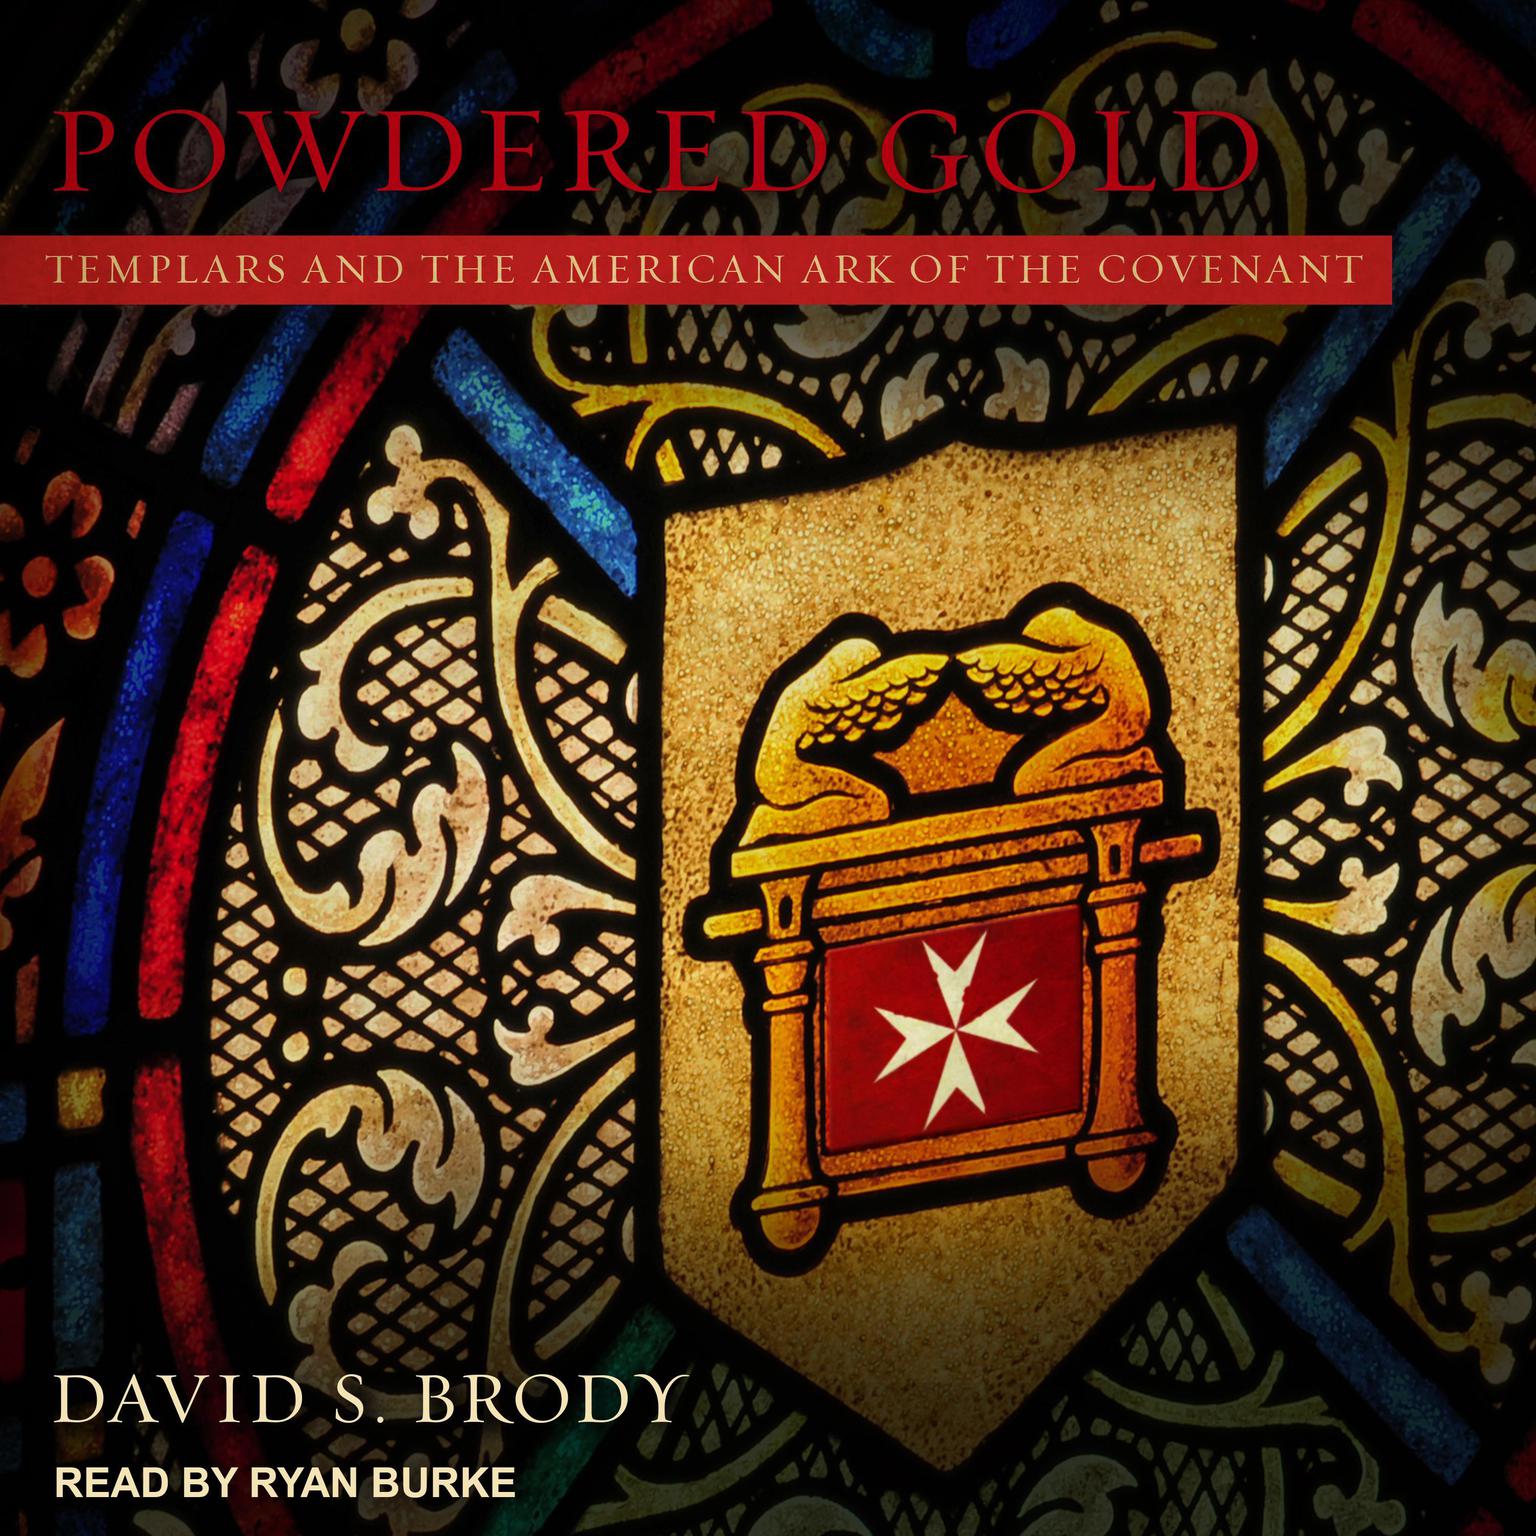 Powdered Gold: Templars and the American Ark of the Covenant Audiobook, by David S. Brody